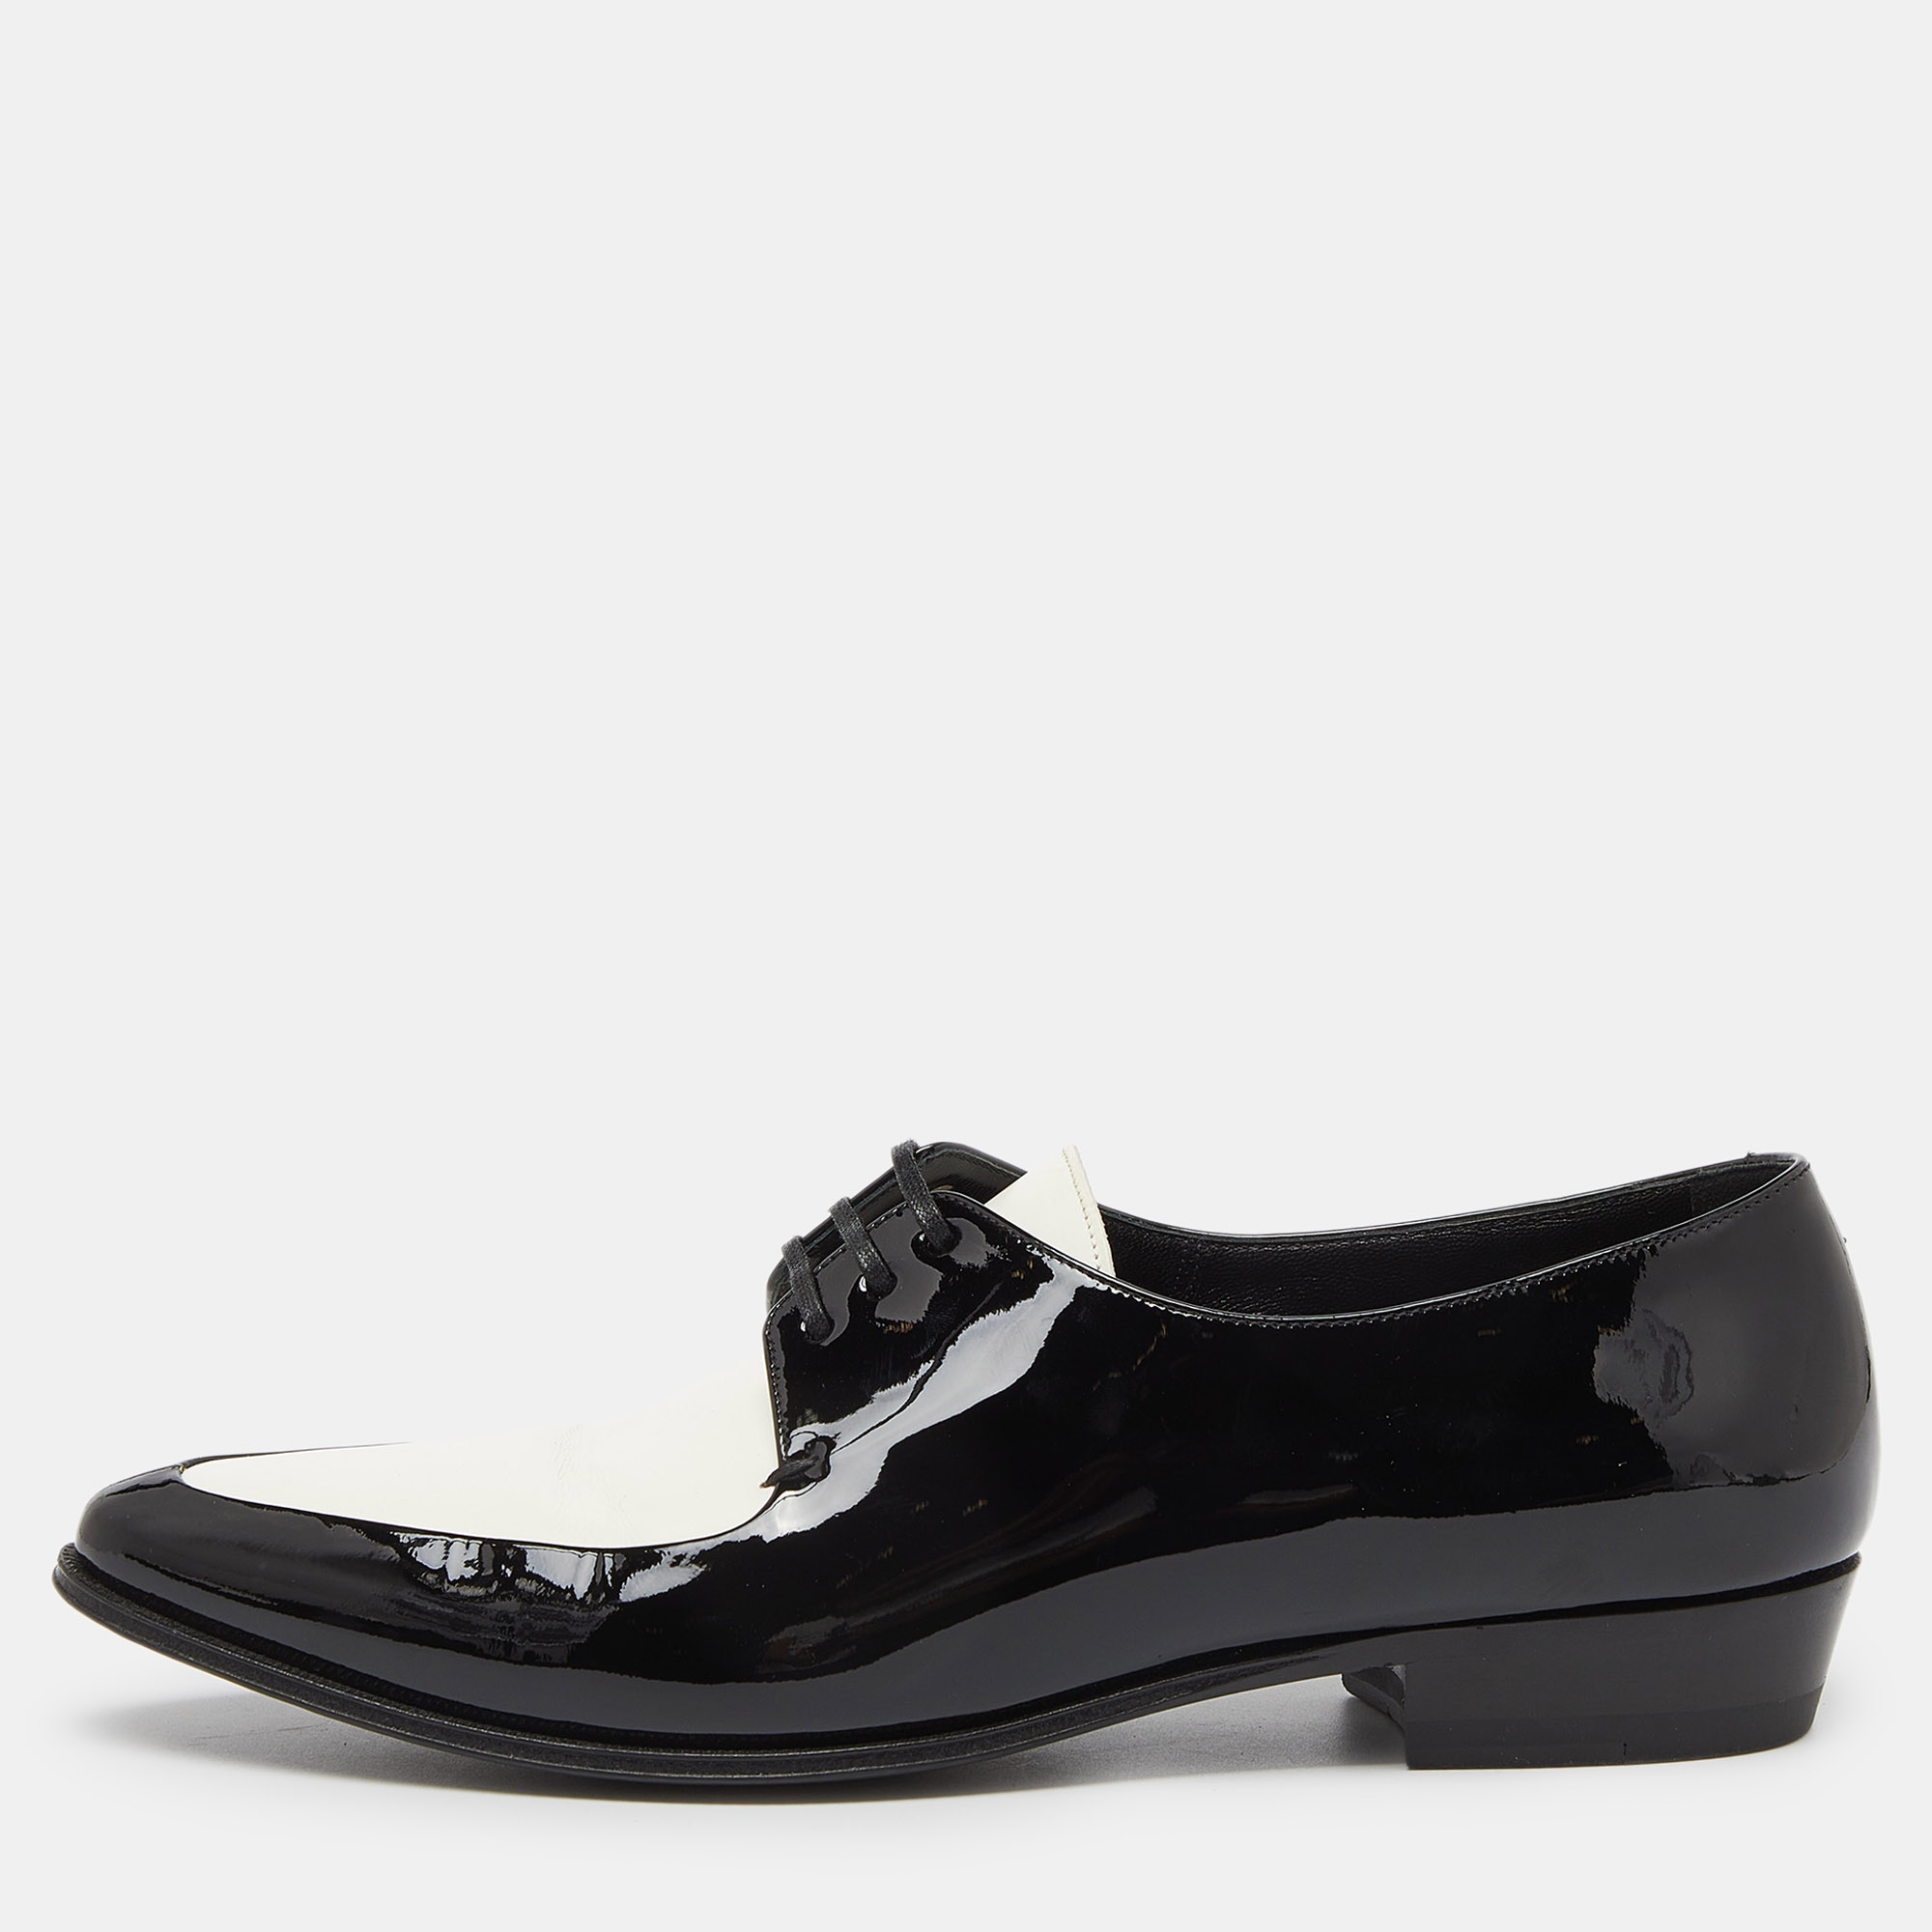 

Celine White//Black Patent Leather Lace Up Pointed Toe Oxfords Size